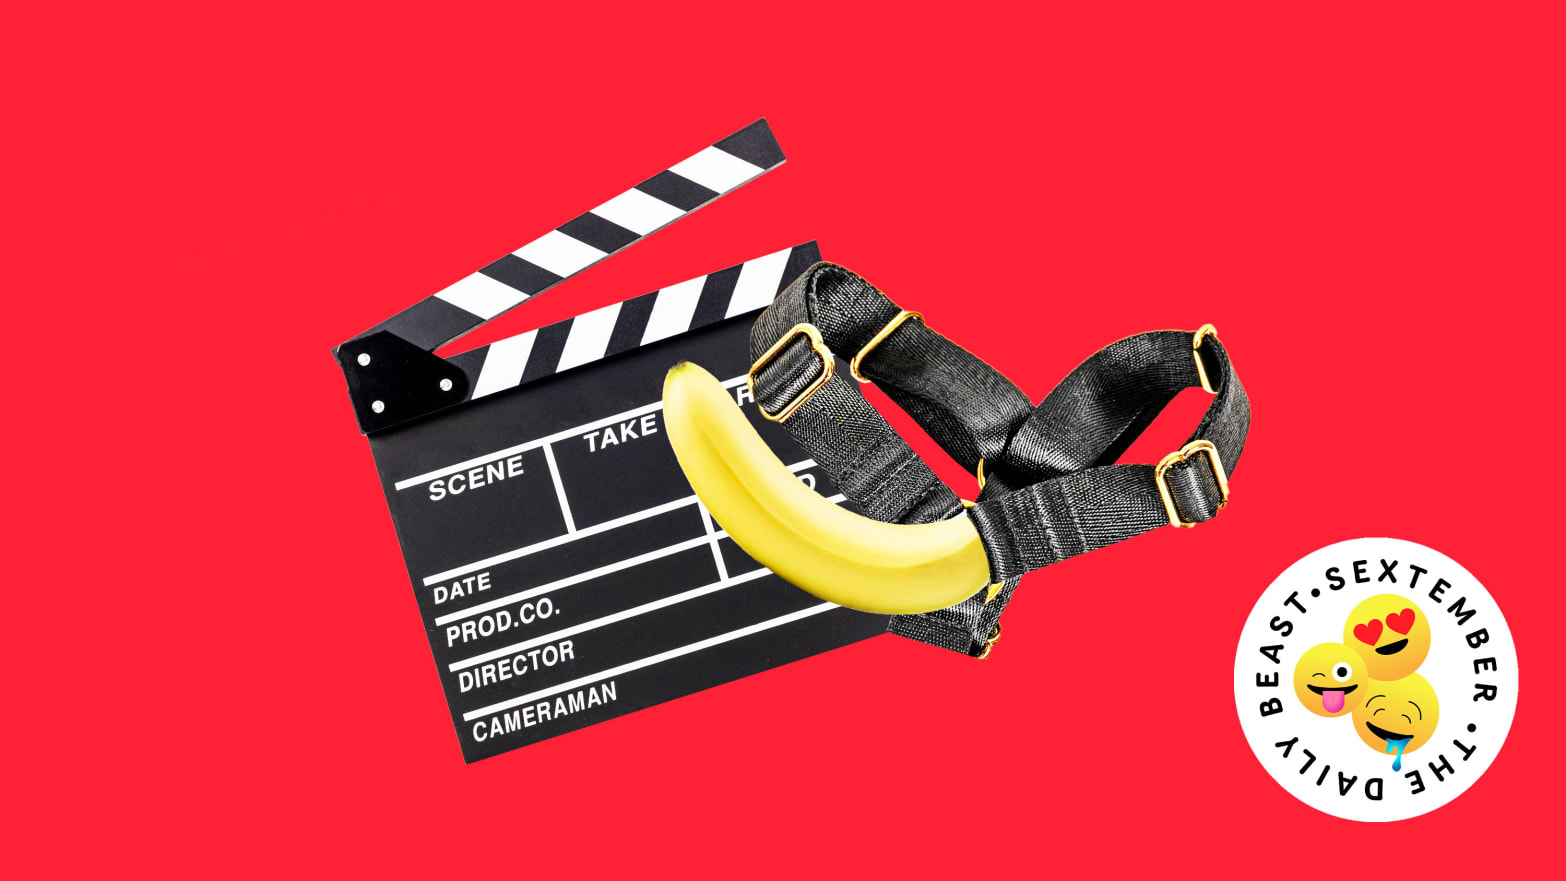 A film clapboard with a banana inside a harness